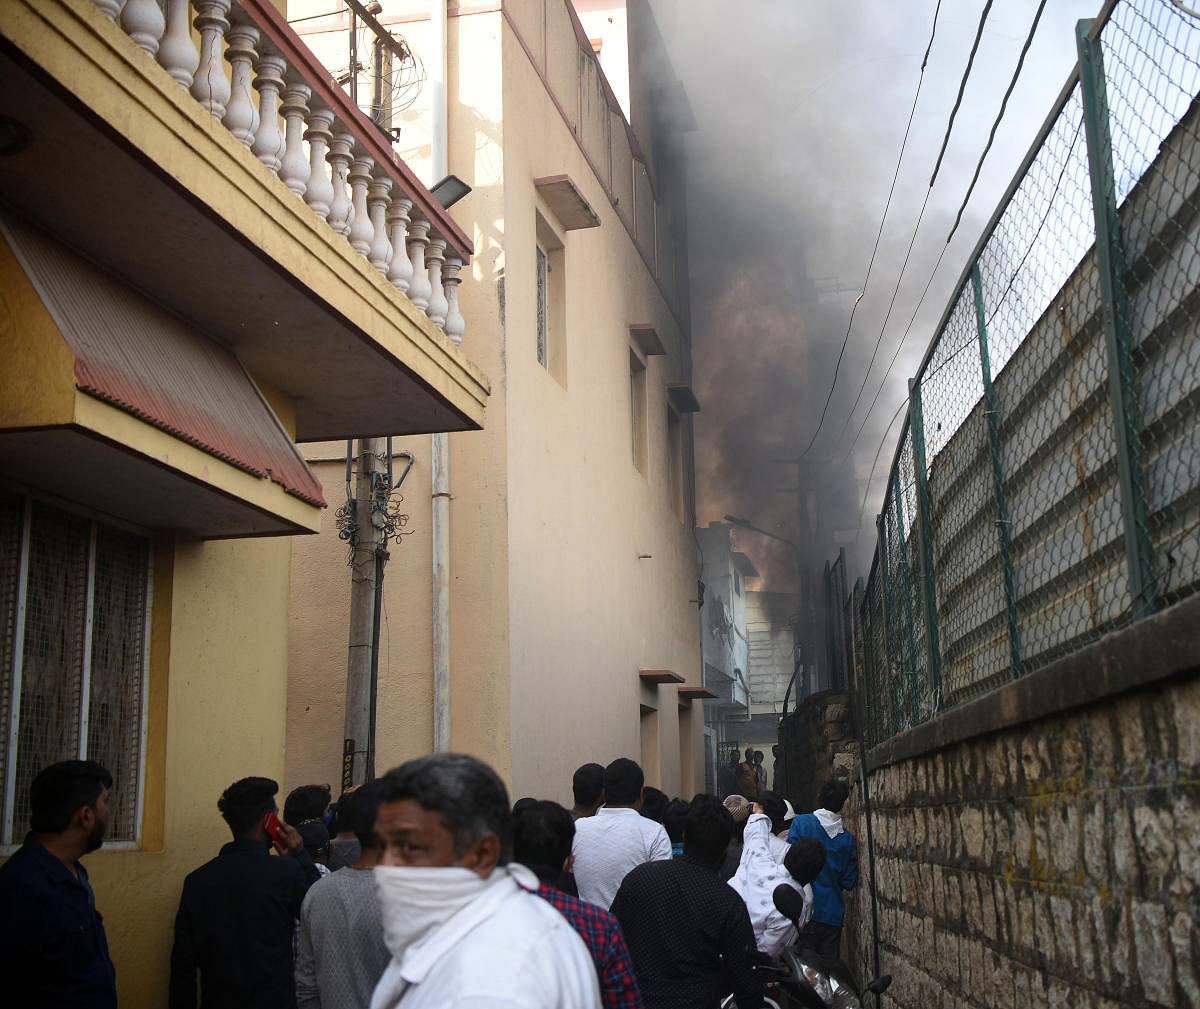 Smoke rises from the metro site in Bamboo Bazaar, Shivajinagar, on Saturday. The site boundary is separated through a small alley from a row of tightly packed houses in the densely populated locality. Some houses suffered damage following the fire. Credit: DH Photo/Pushkar V